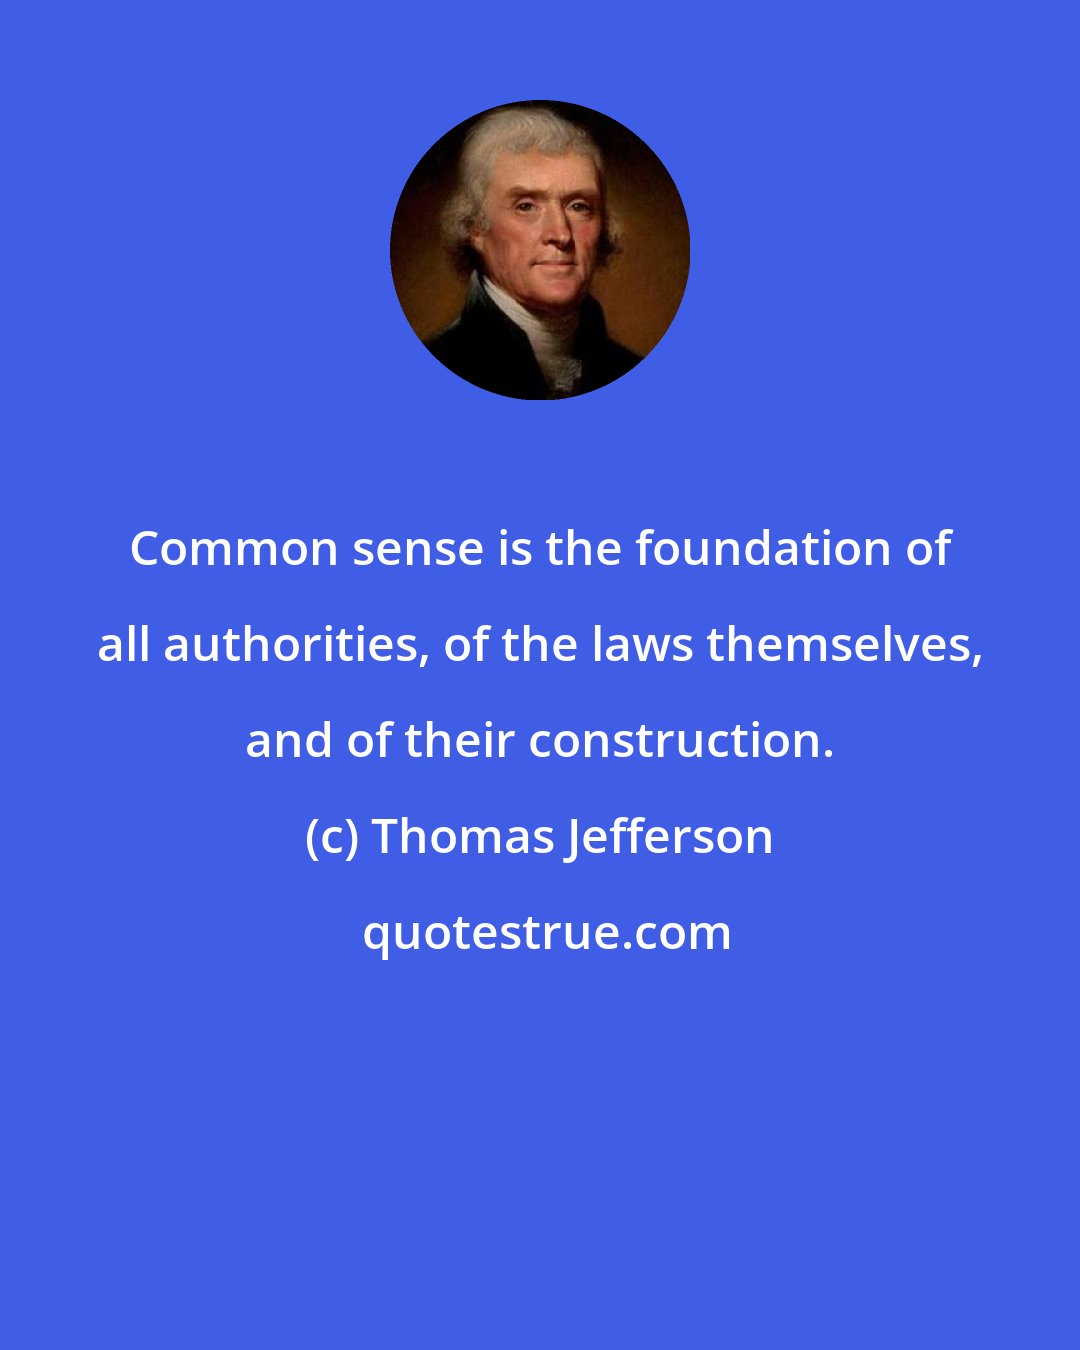 Thomas Jefferson: Common sense is the foundation of all authorities, of the laws themselves, and of their construction.